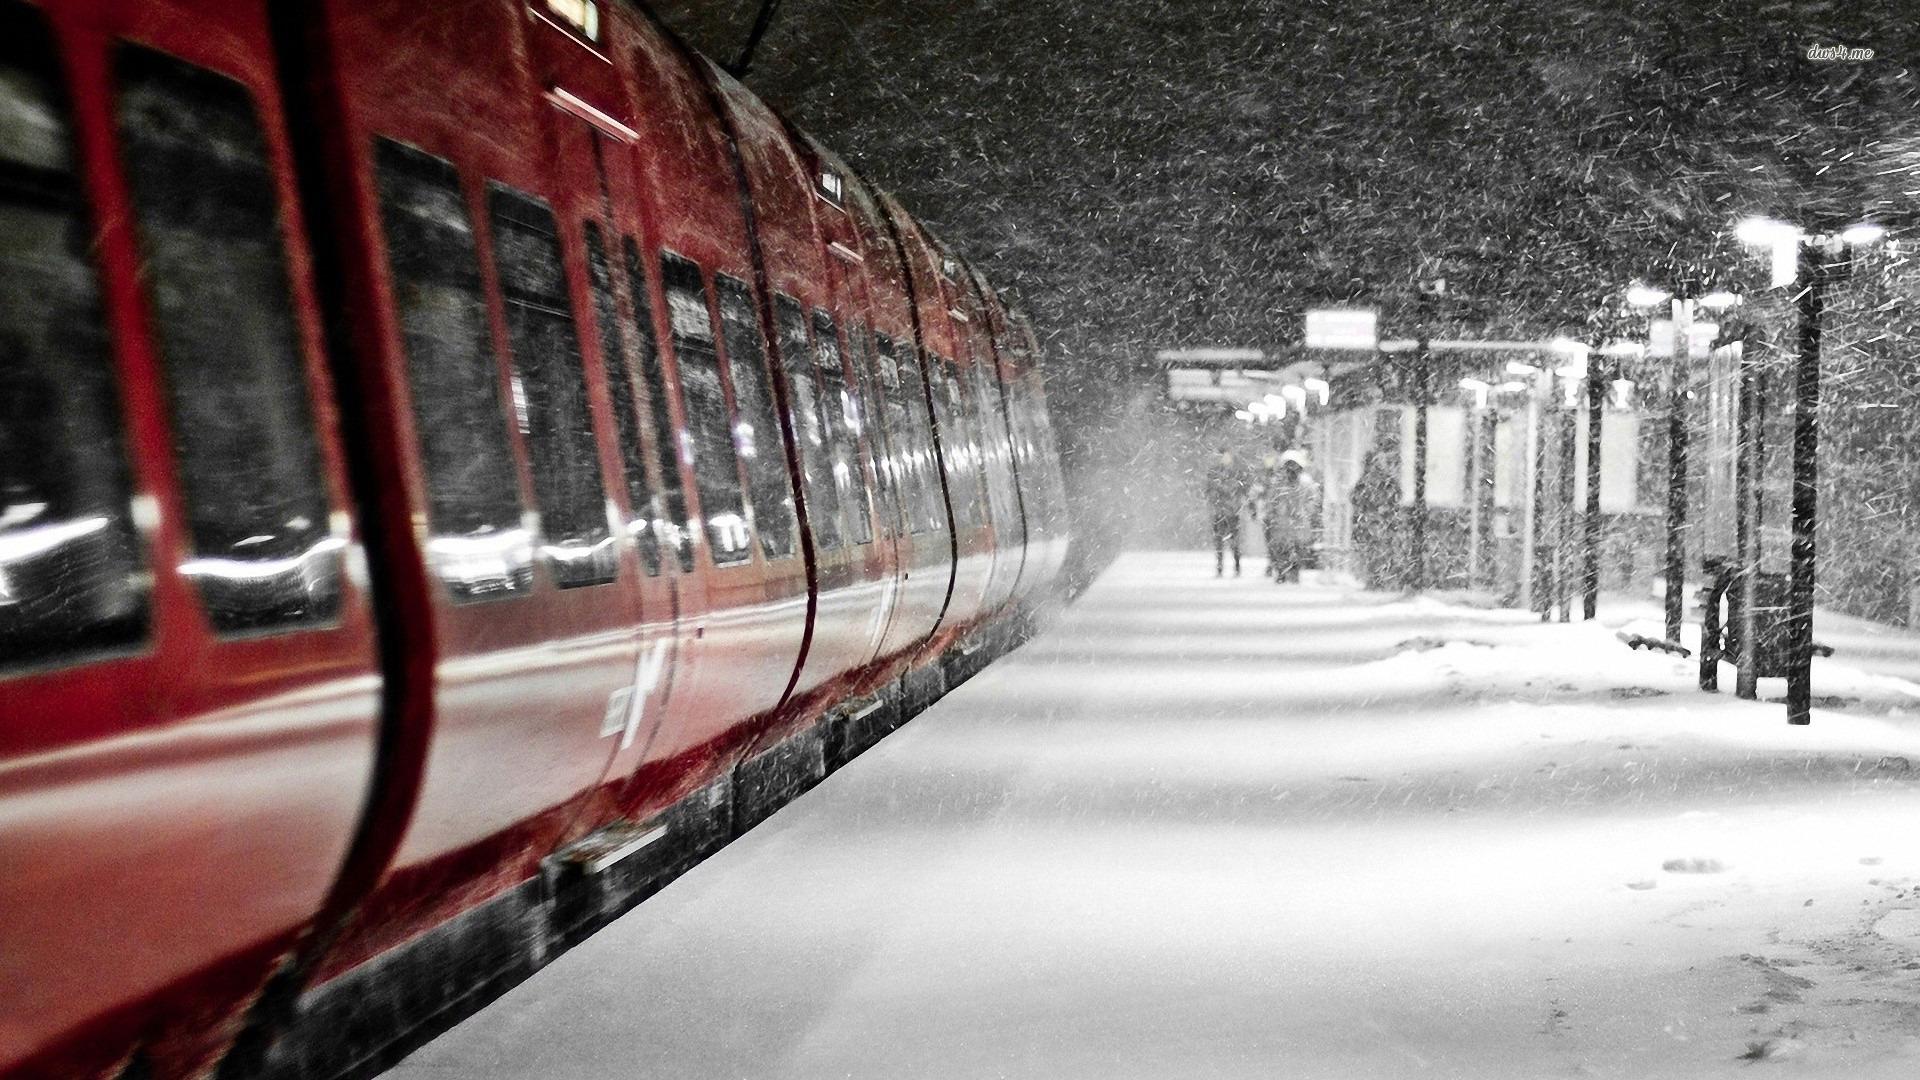 Red train in the snow storm wallpaper